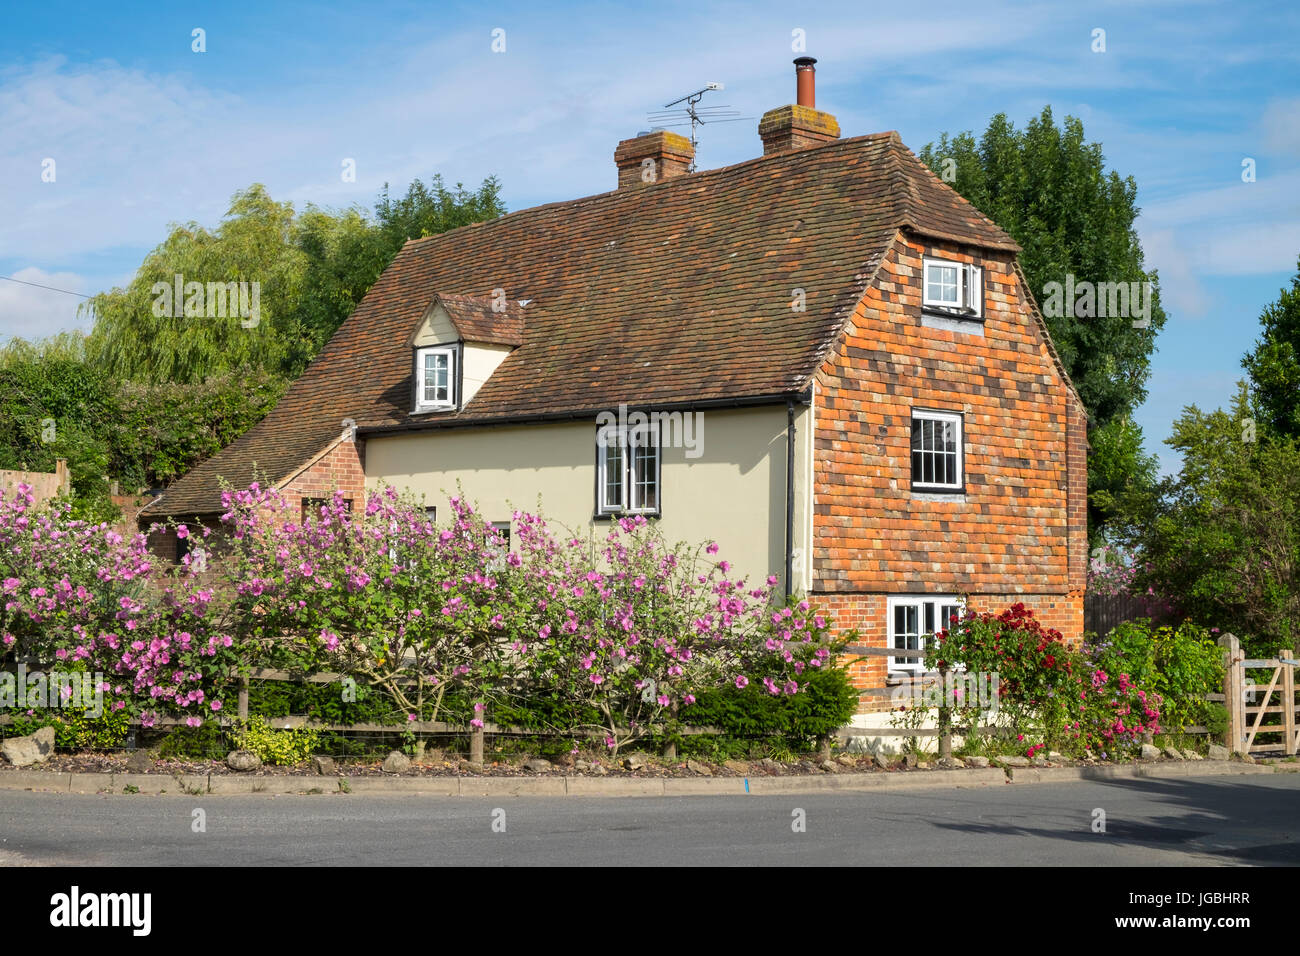 English british country cottage house rural britain countryside Warehorne Kent picturesque Stock Photo